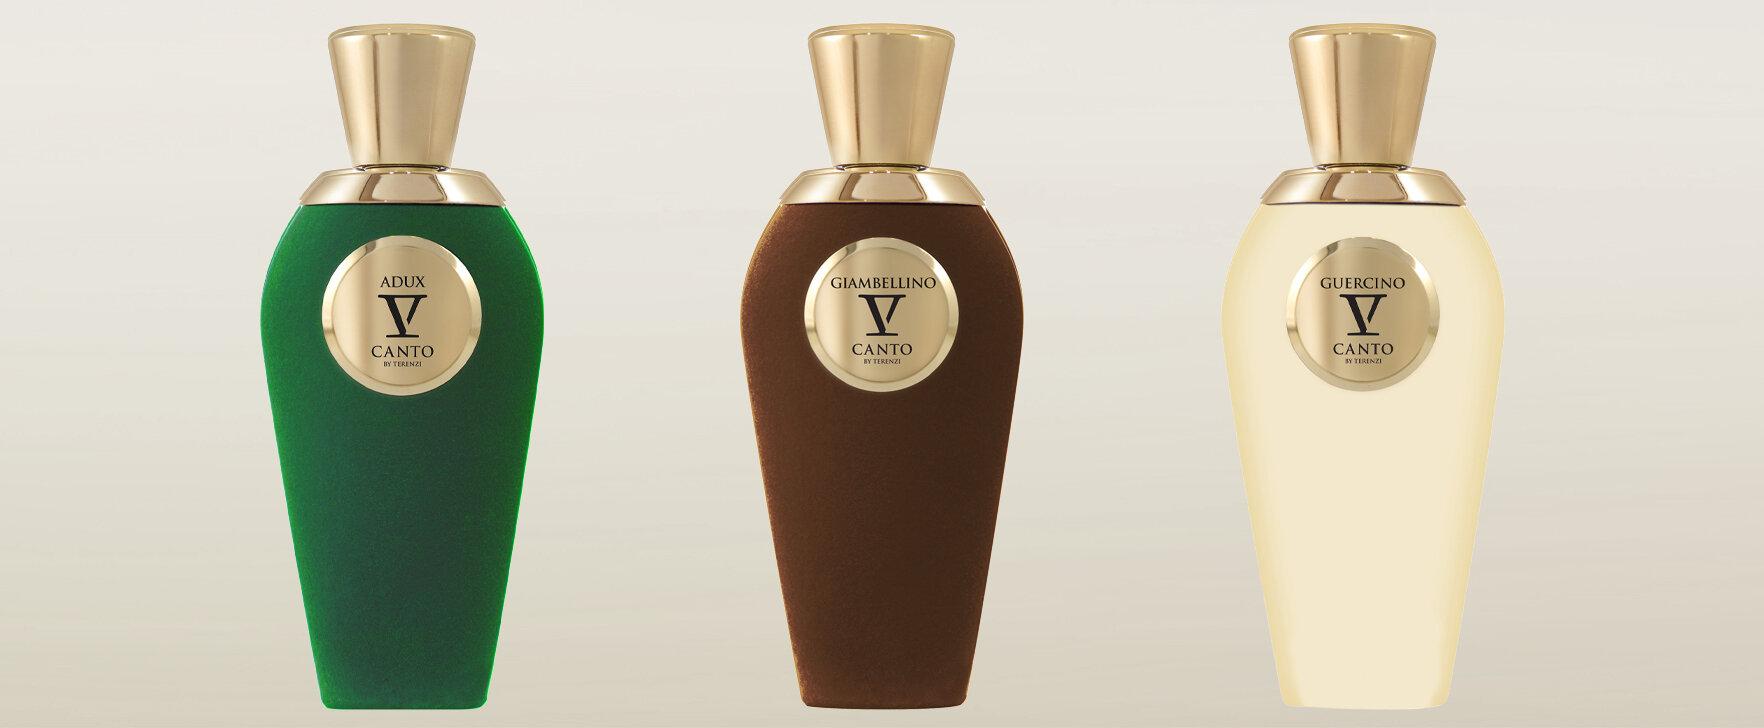 V Canto's New Fragrances Pay Homage to Great Artists: "Adux", "Giambellino" and "Guercino"